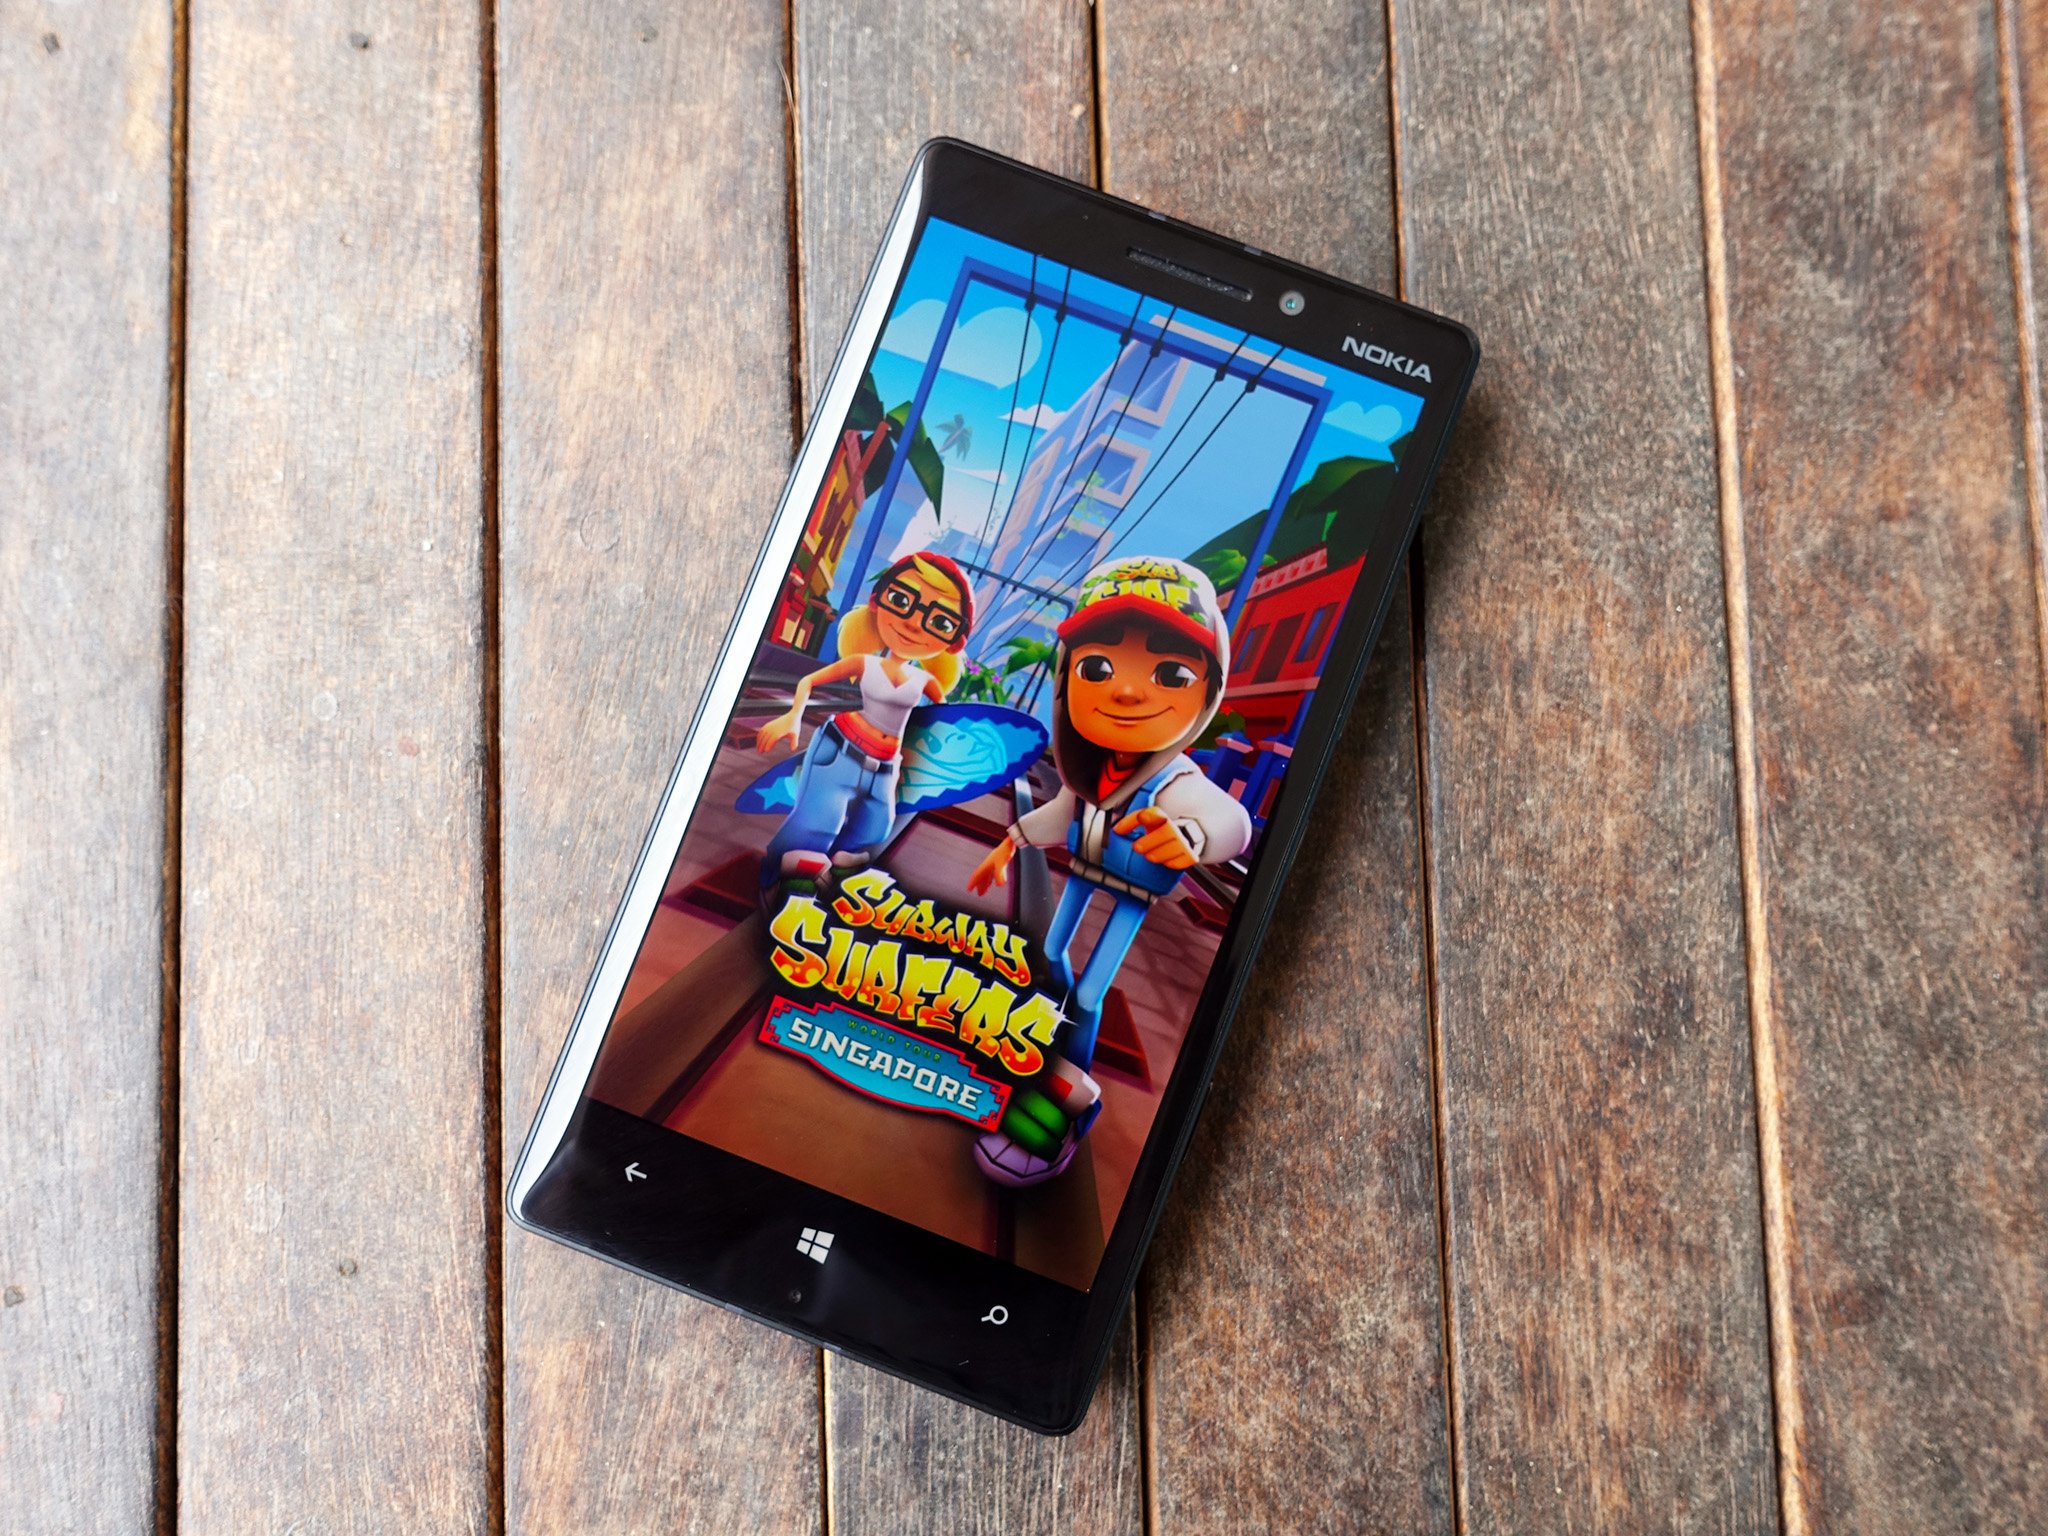 Subway Surfers for Windows 10 mobile receives a major update